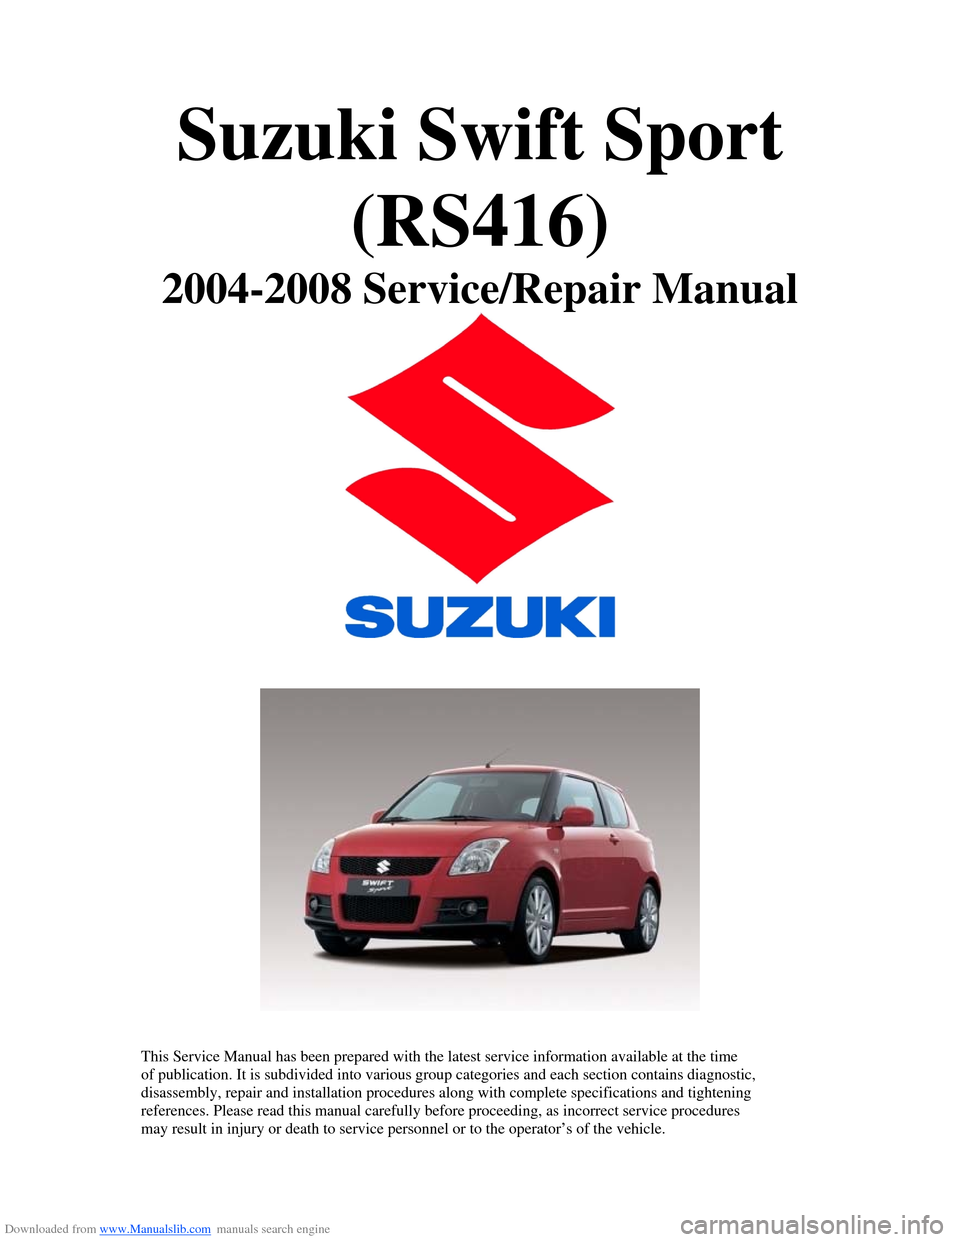 SUZUKI SWIFT 2006 2.G Service Workshop Manual Downloaded from www.Manualslib.com manuals search engine Suzuki Swift Sport (RS416) 
2004-2008 Service/Repair Manual 
 
 
  
 
This Service Manual has been prepared with the latest service information